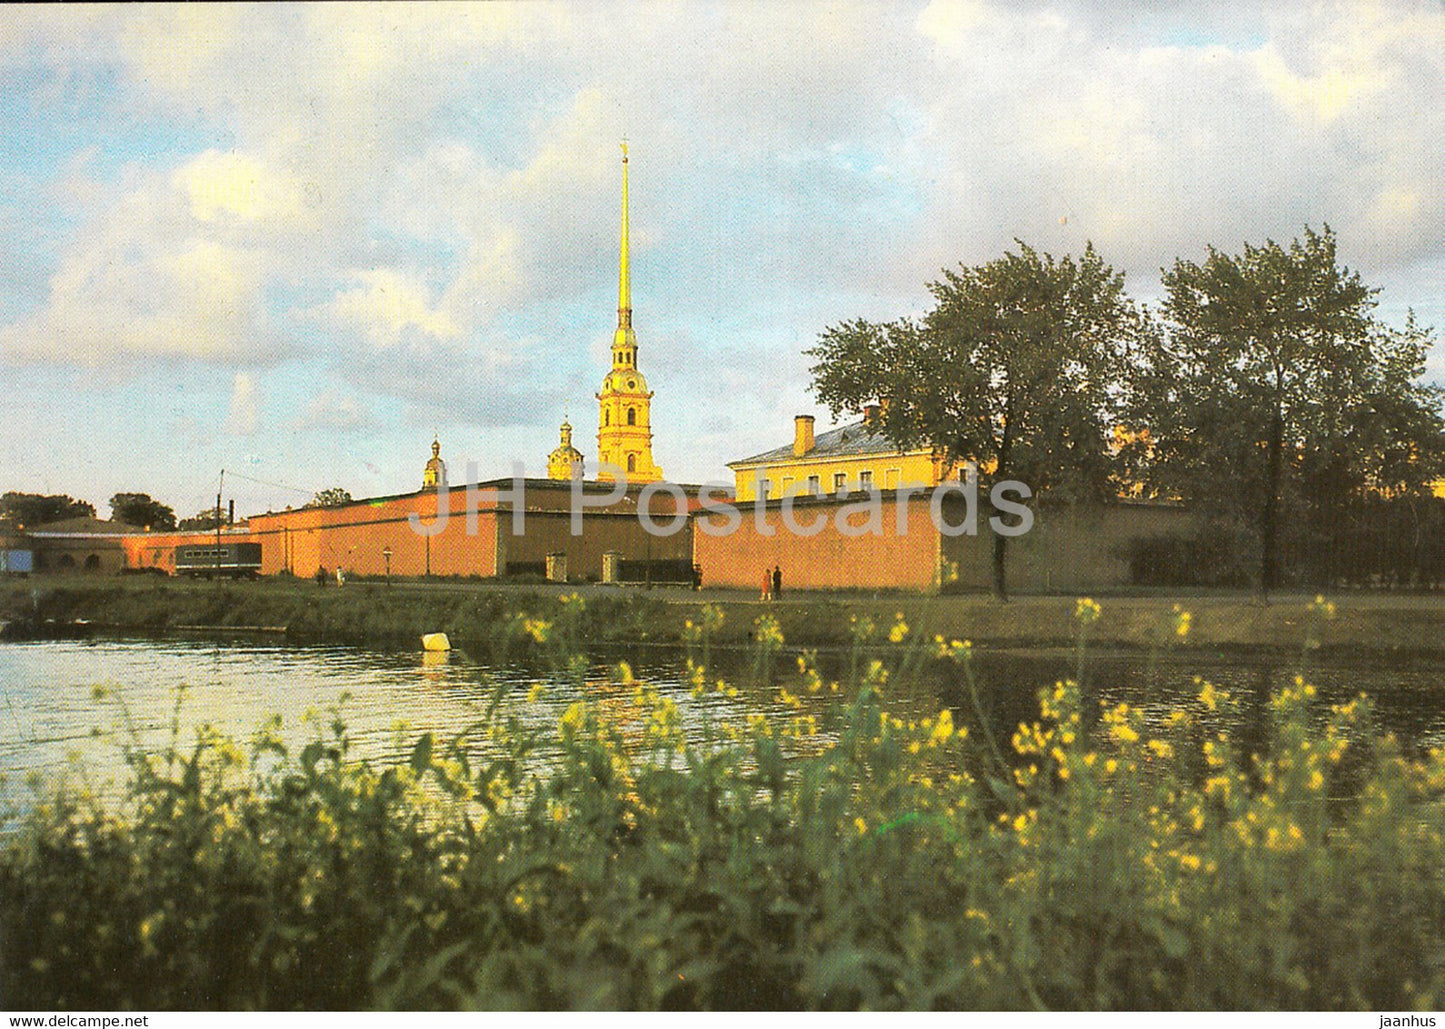 Leningrad - St Petersburg - The Peter and Paul Fortress - 1984 - Russia USSR - unused - JH Postcards